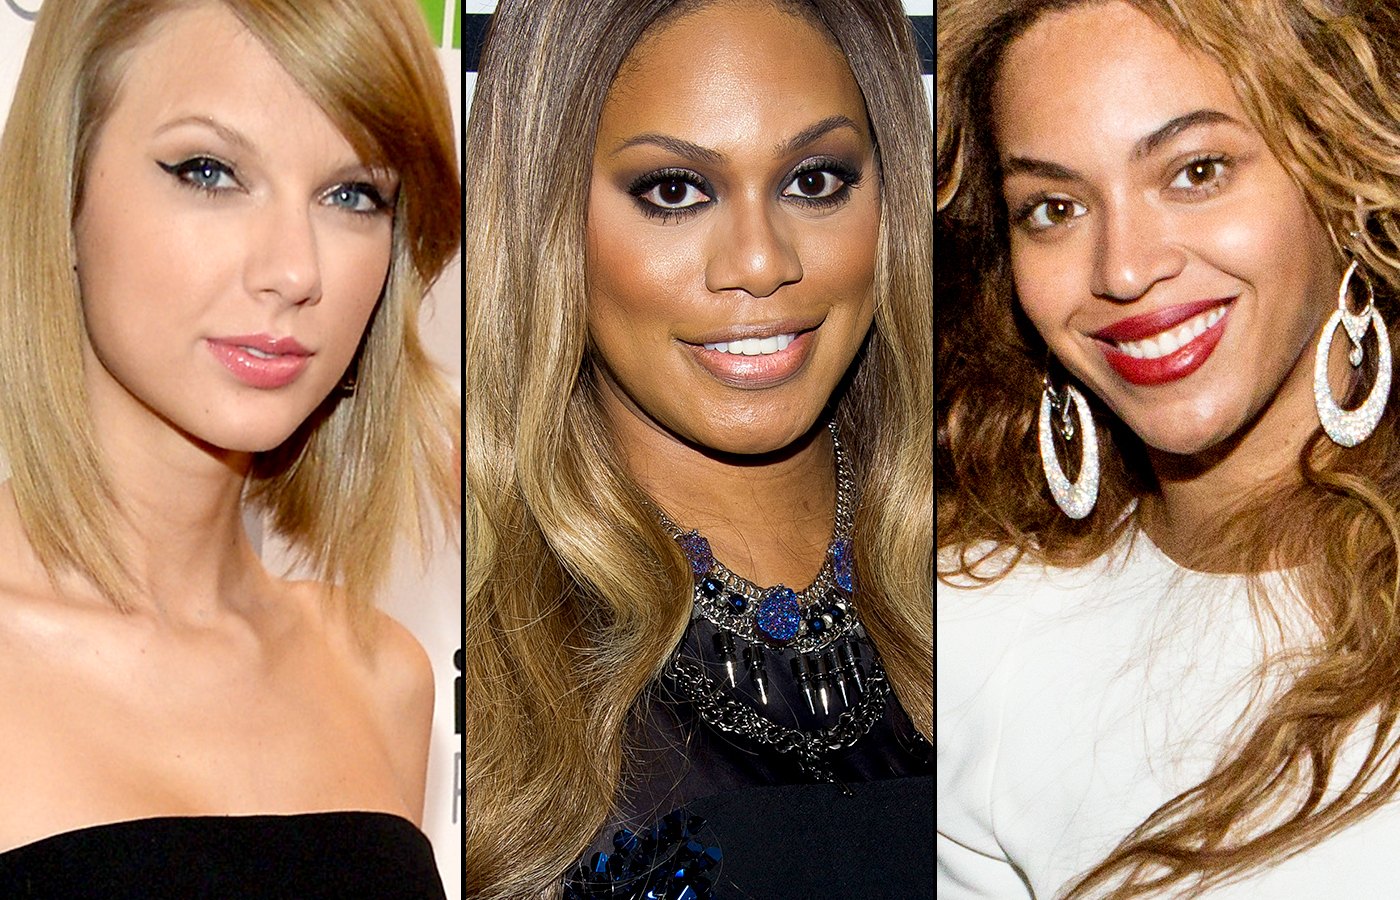 Taylor Swift, Laverne Cox, and Beyonce